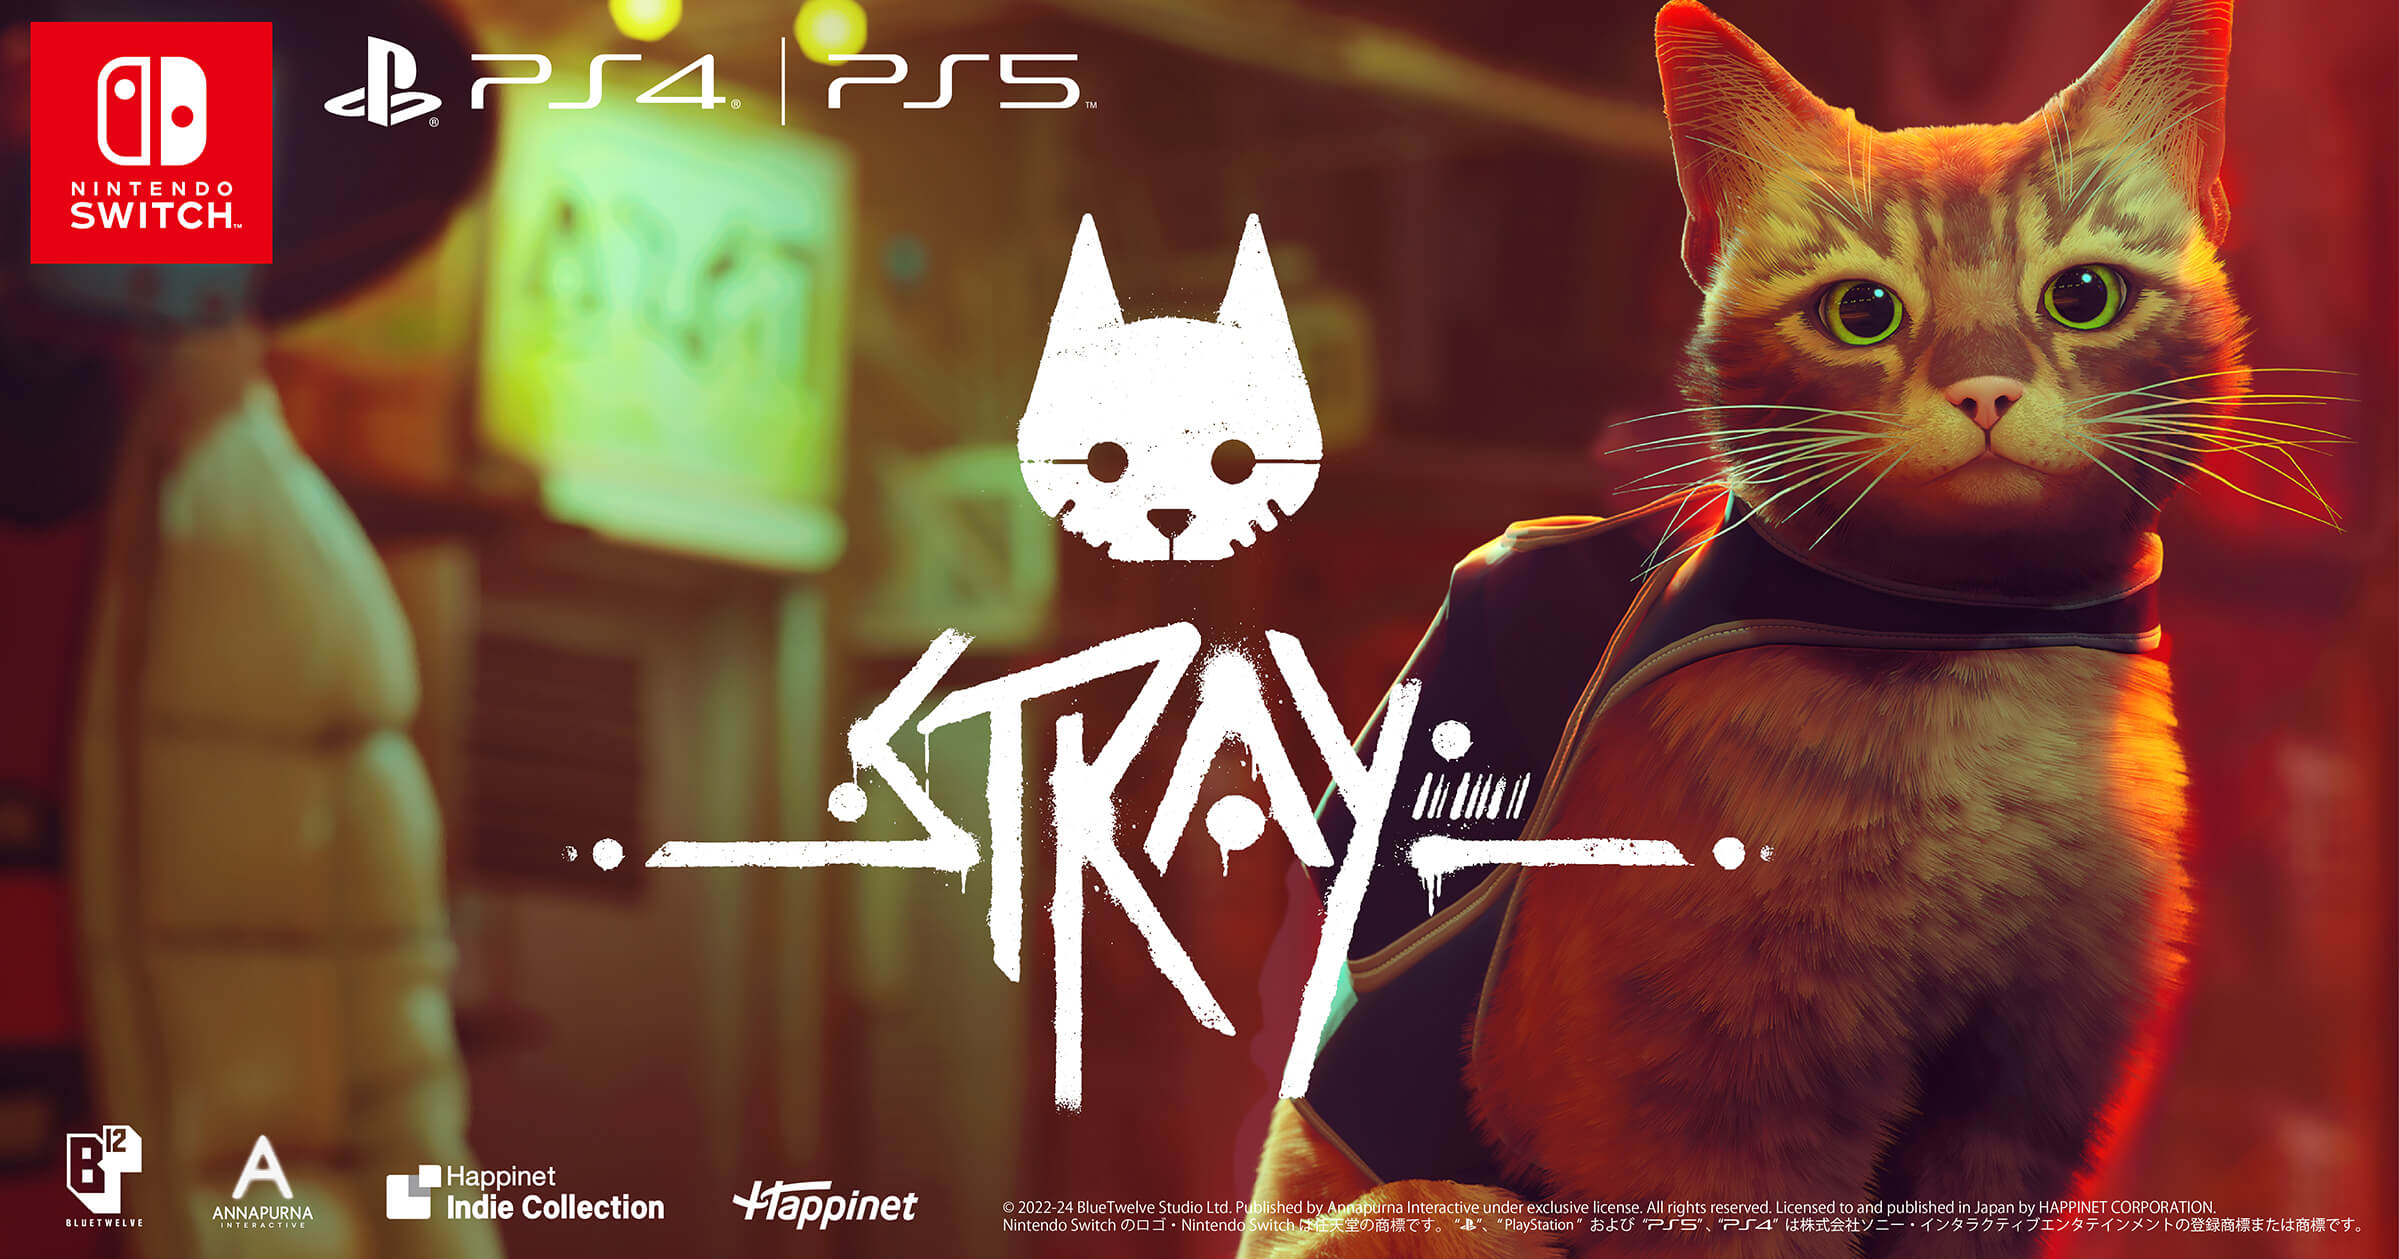 Stray game PS4 + Art Cards 🐈💕 #stray #straygame #unboxing #ゲーム #ストレイ